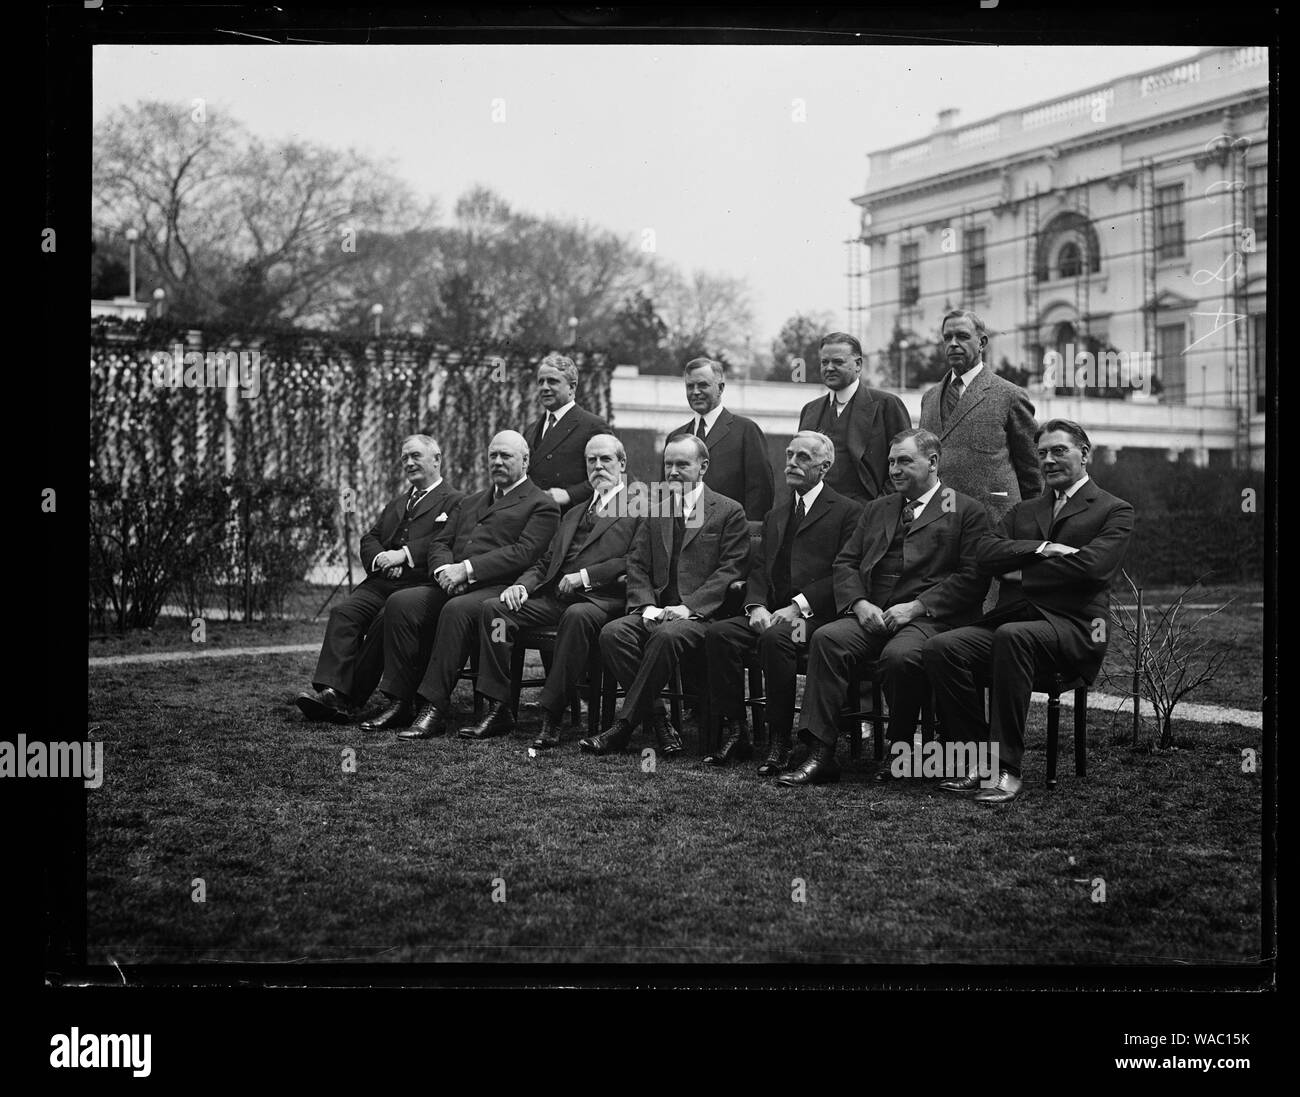 Coolidge Cabinet outside White House. Front row, left to right: Henry Stewart New, John W. Weeks, Charles Evans Hughes, Calvin Coolidge, Andrew Mellon, Harlan F. Stone, and Curtis D. Wilbur. Back row, left to right: James J. Davis, Henry C. Wallace, Herbert Hoover, and Hubert Work Stock Photo